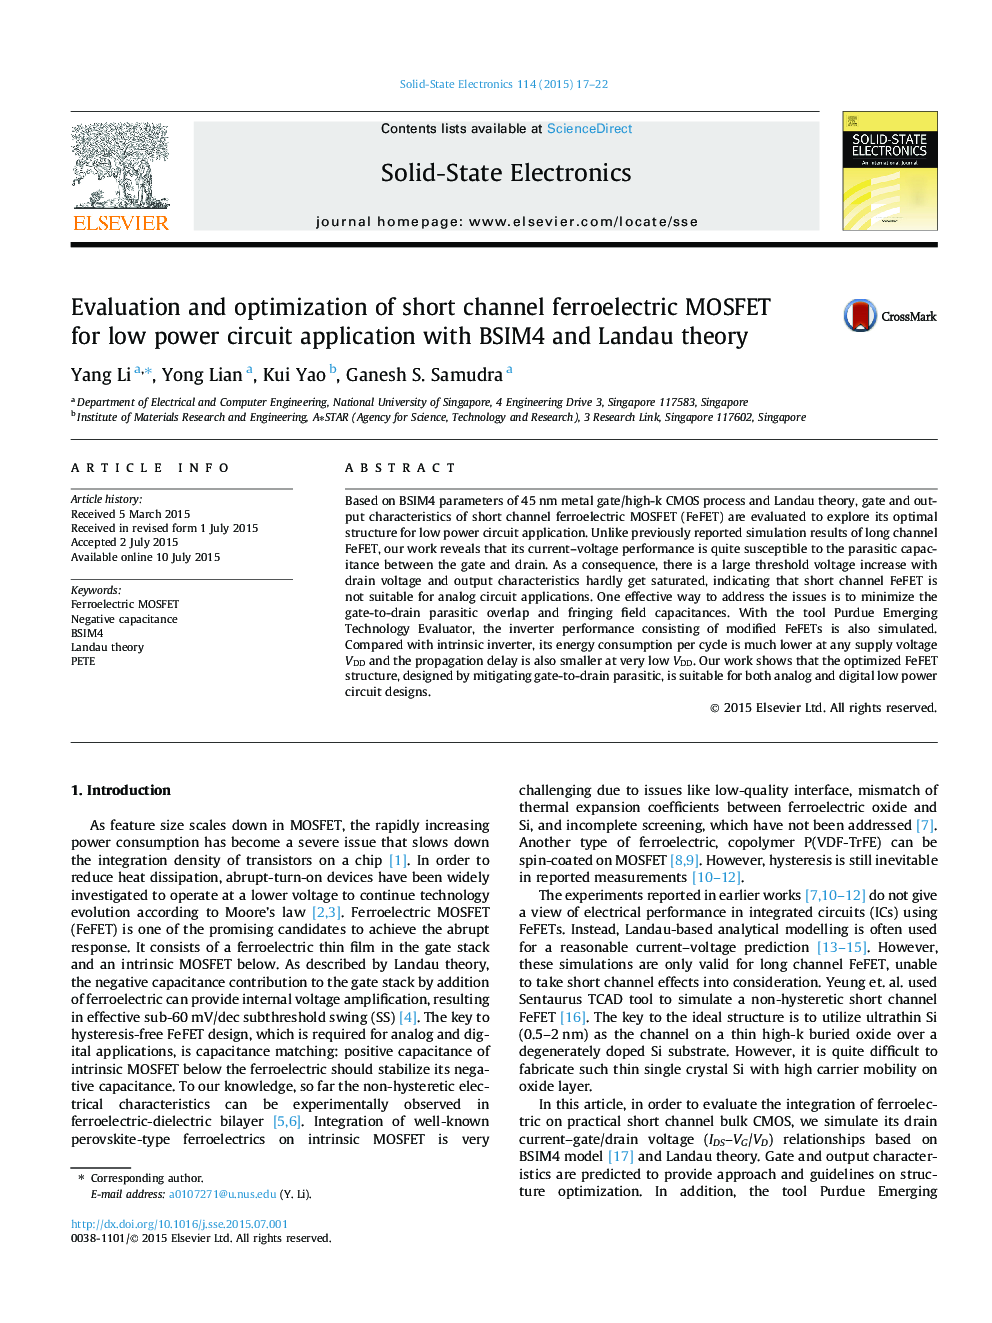 Evaluation and optimization of short channel ferroelectric MOSFET for low power circuit application with BSIM4 and Landau theory